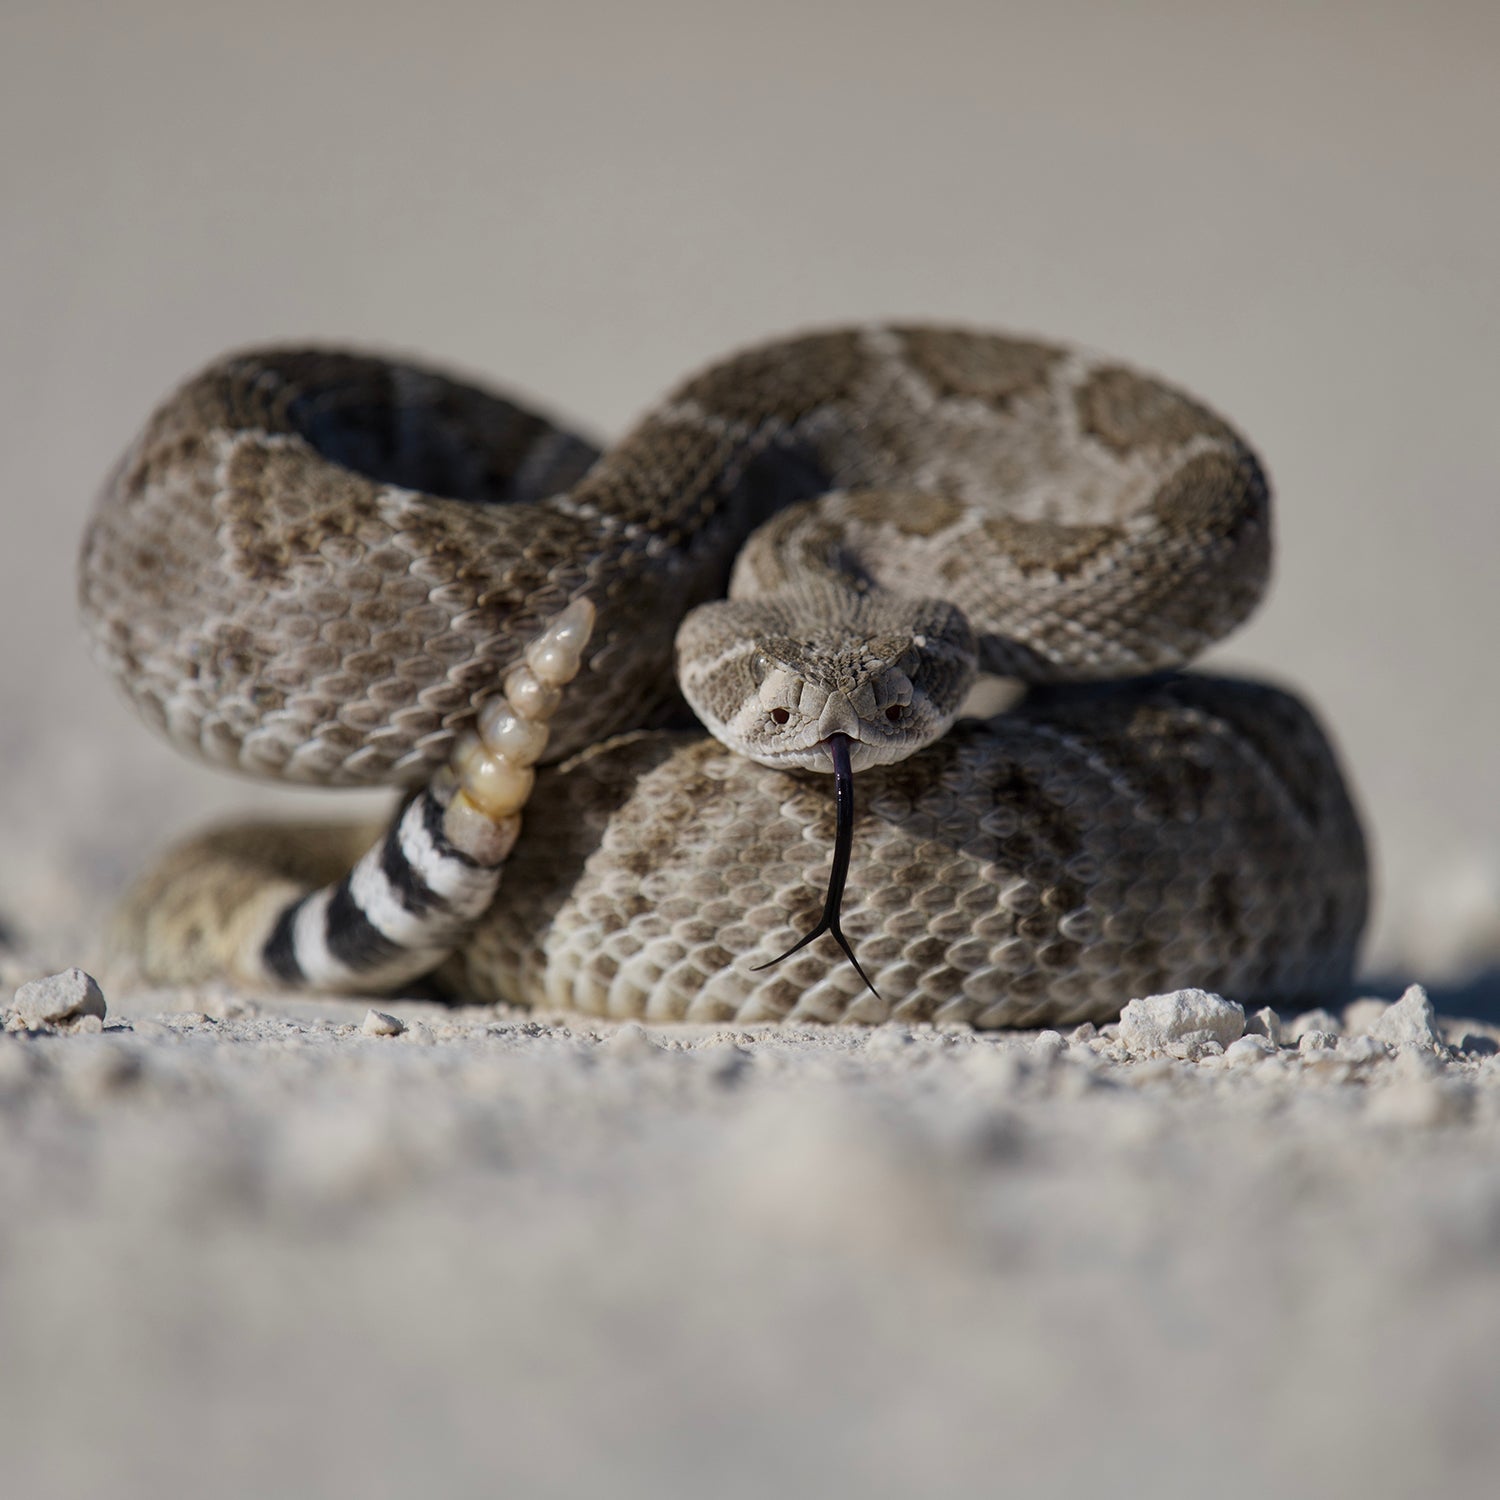 Snake bites are on the rise in US